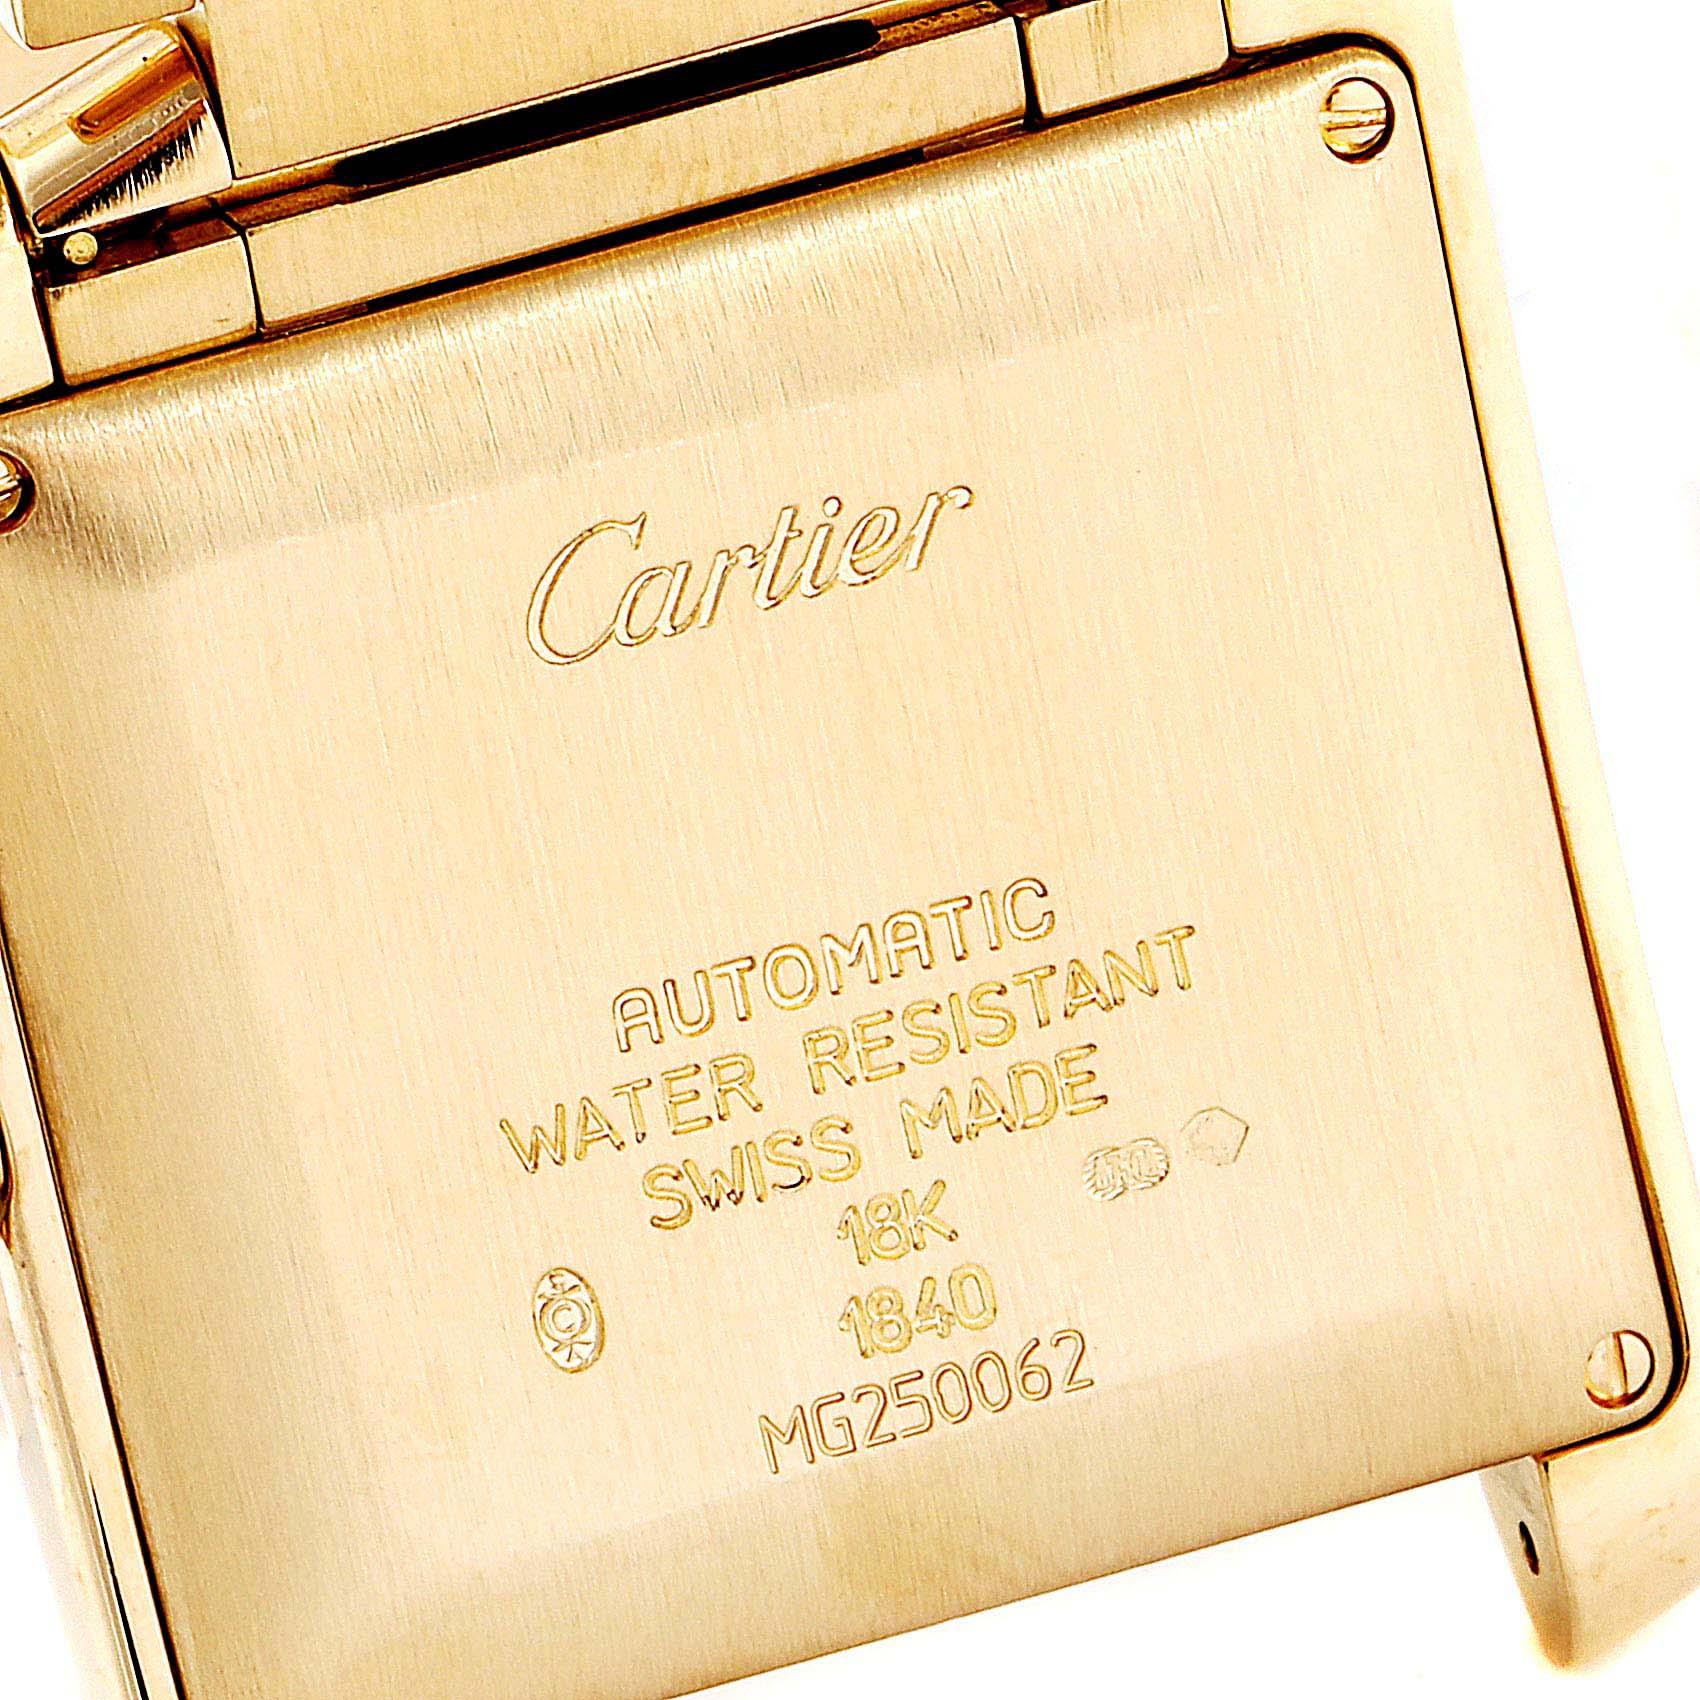 Cartier Tank Francaise Large Yellow Gold Automatic Men's Watch W50001R2 For Sale 2